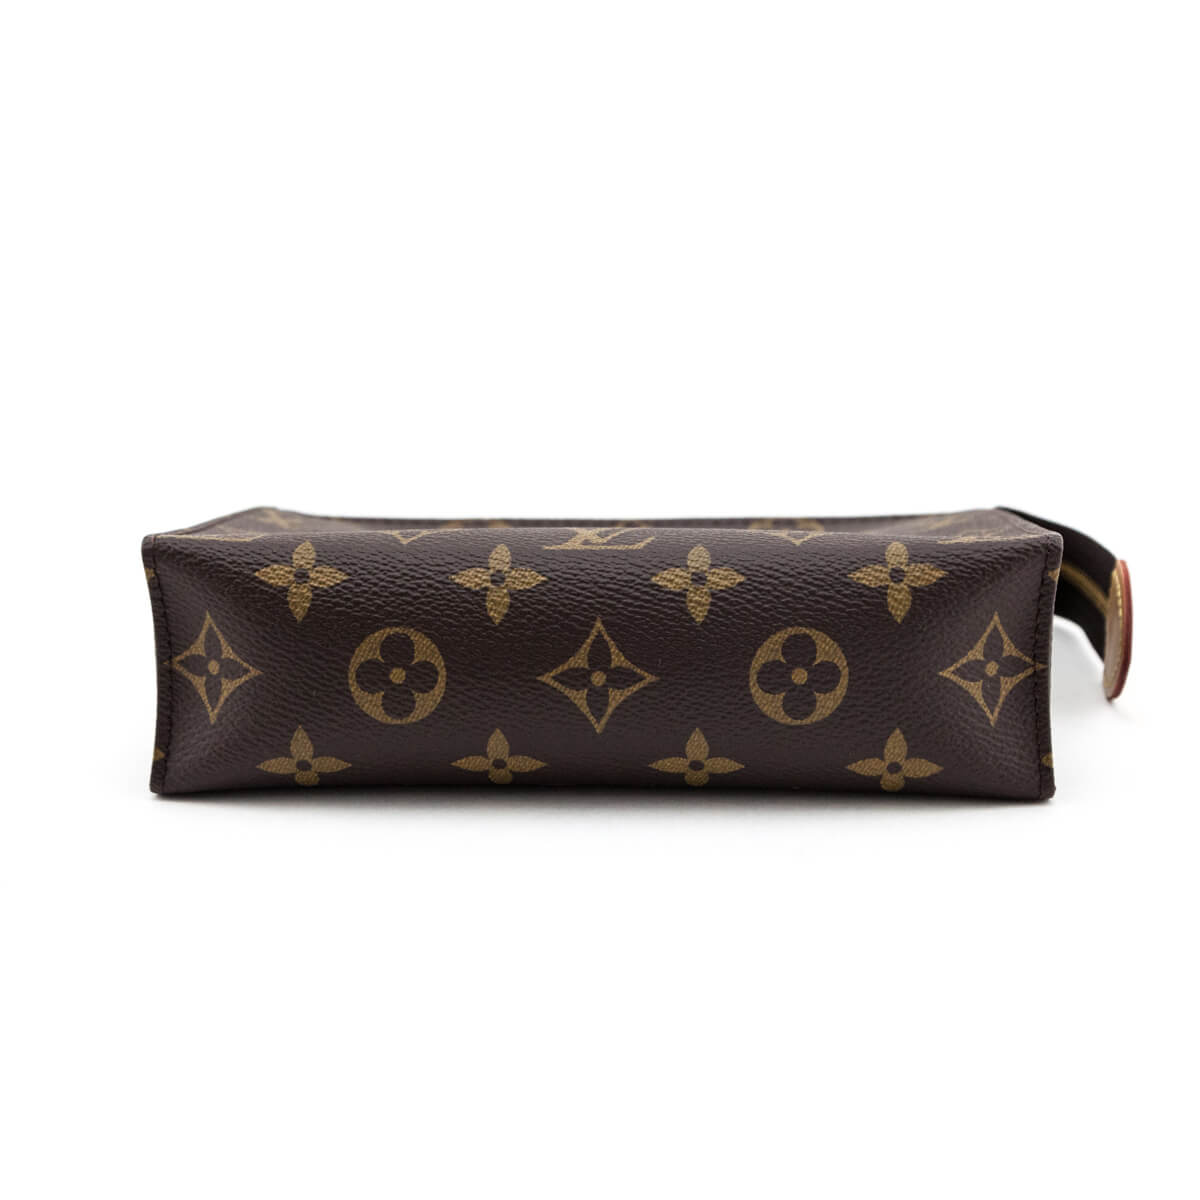 Louis Vuitton Monogram Toiletry Pouch 19 - Brown Cosmetic Bags, Accessories  - LOU789831